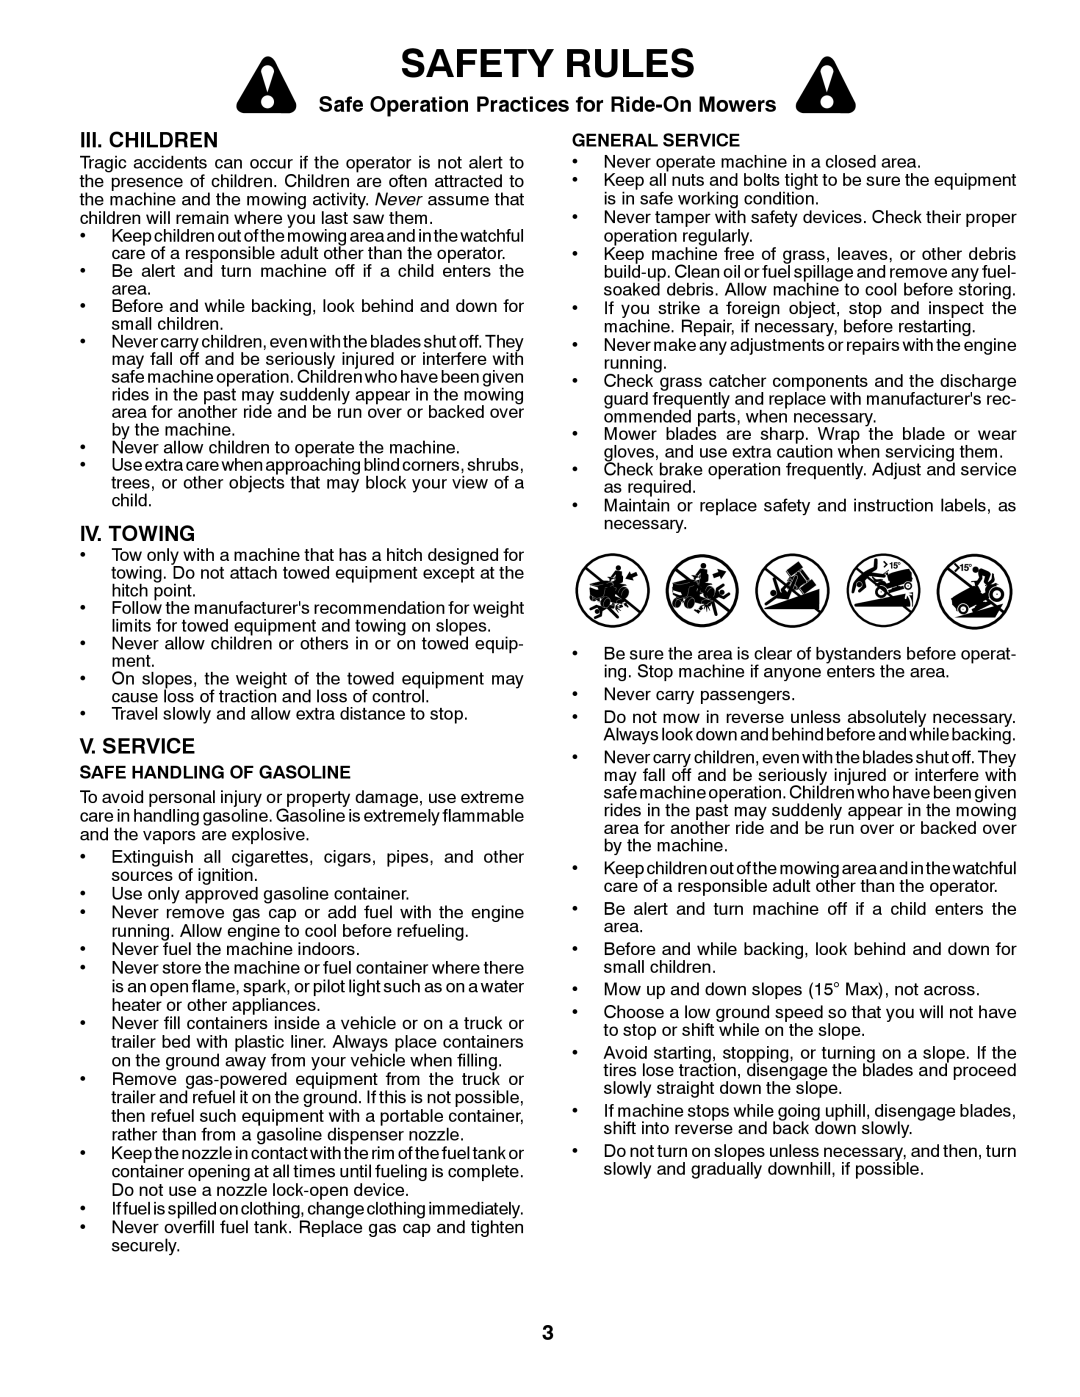 Husqvarna 532 42 41-94 Iii. Children, Iv. Towing, V. Service, Safety Rules, Safe Operation Practices for Ride-On Mowers 